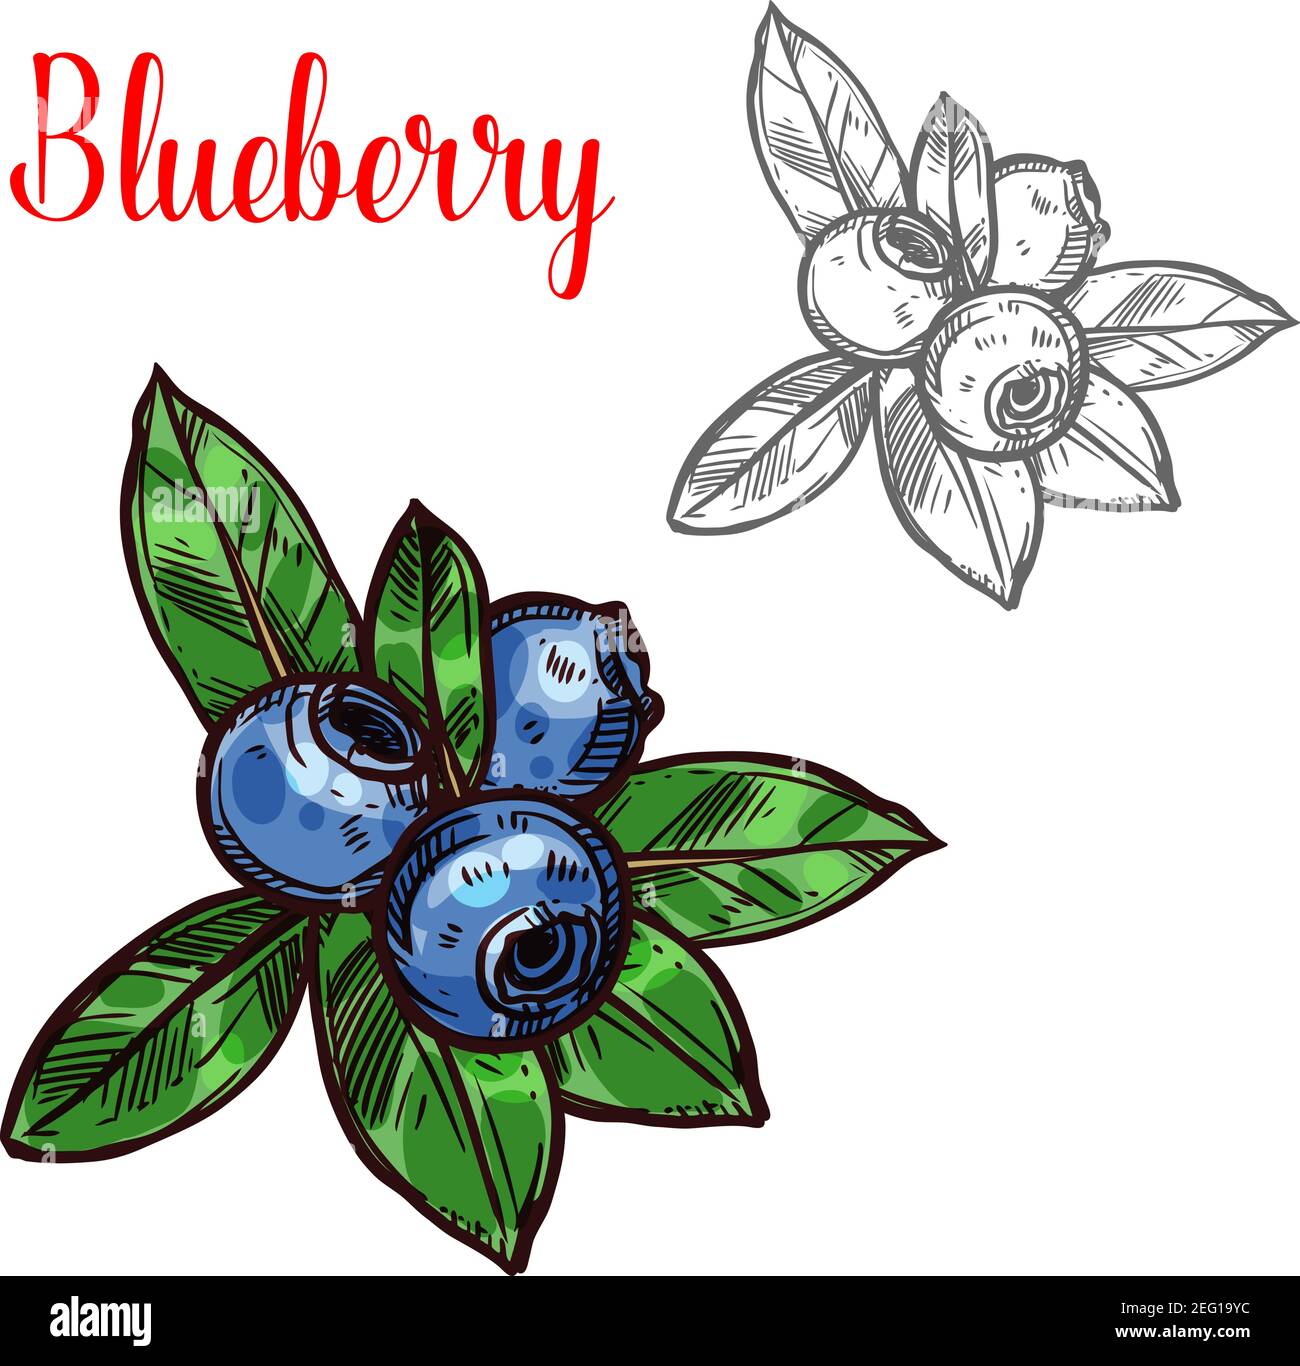 How to Draw Blueberries Step by Step  EasyLineDrawing